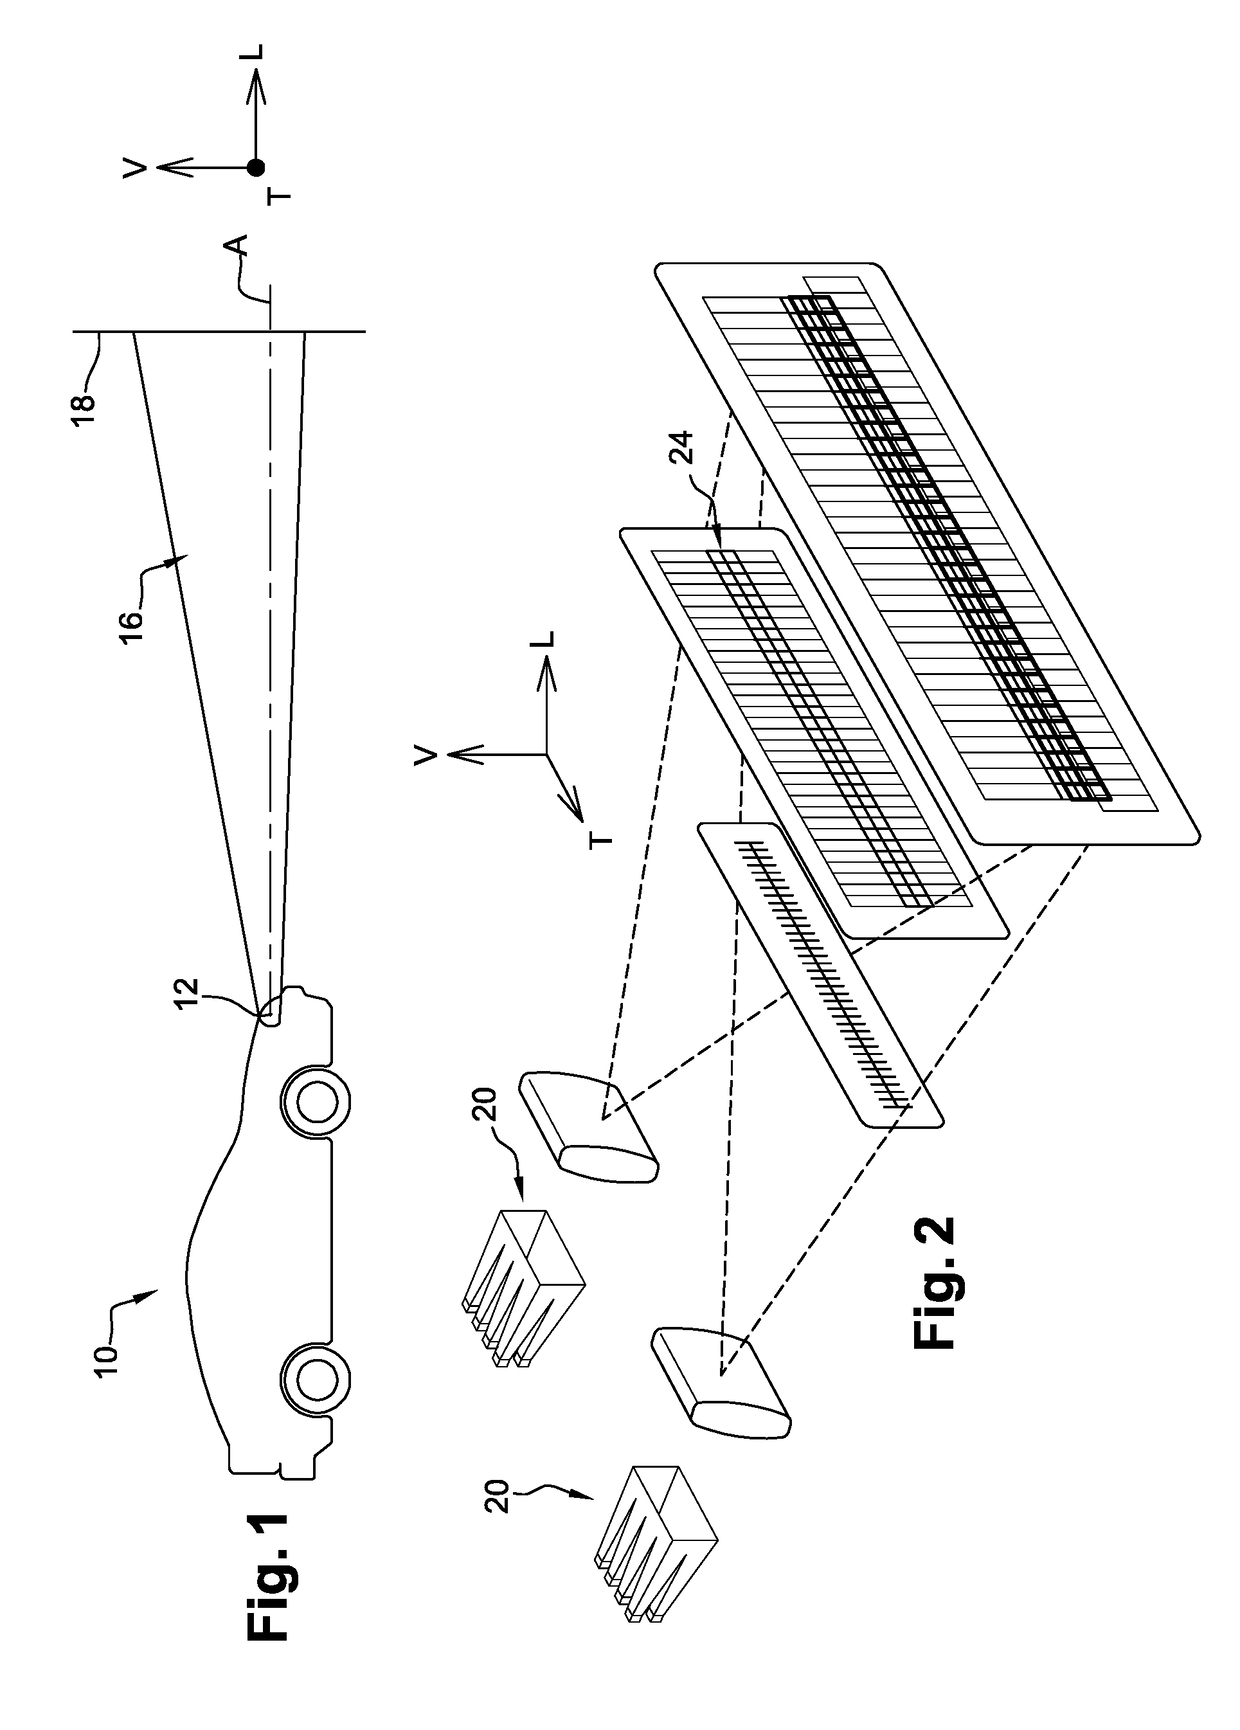 Lighting device projecting two vertically offset matrices of light pixels